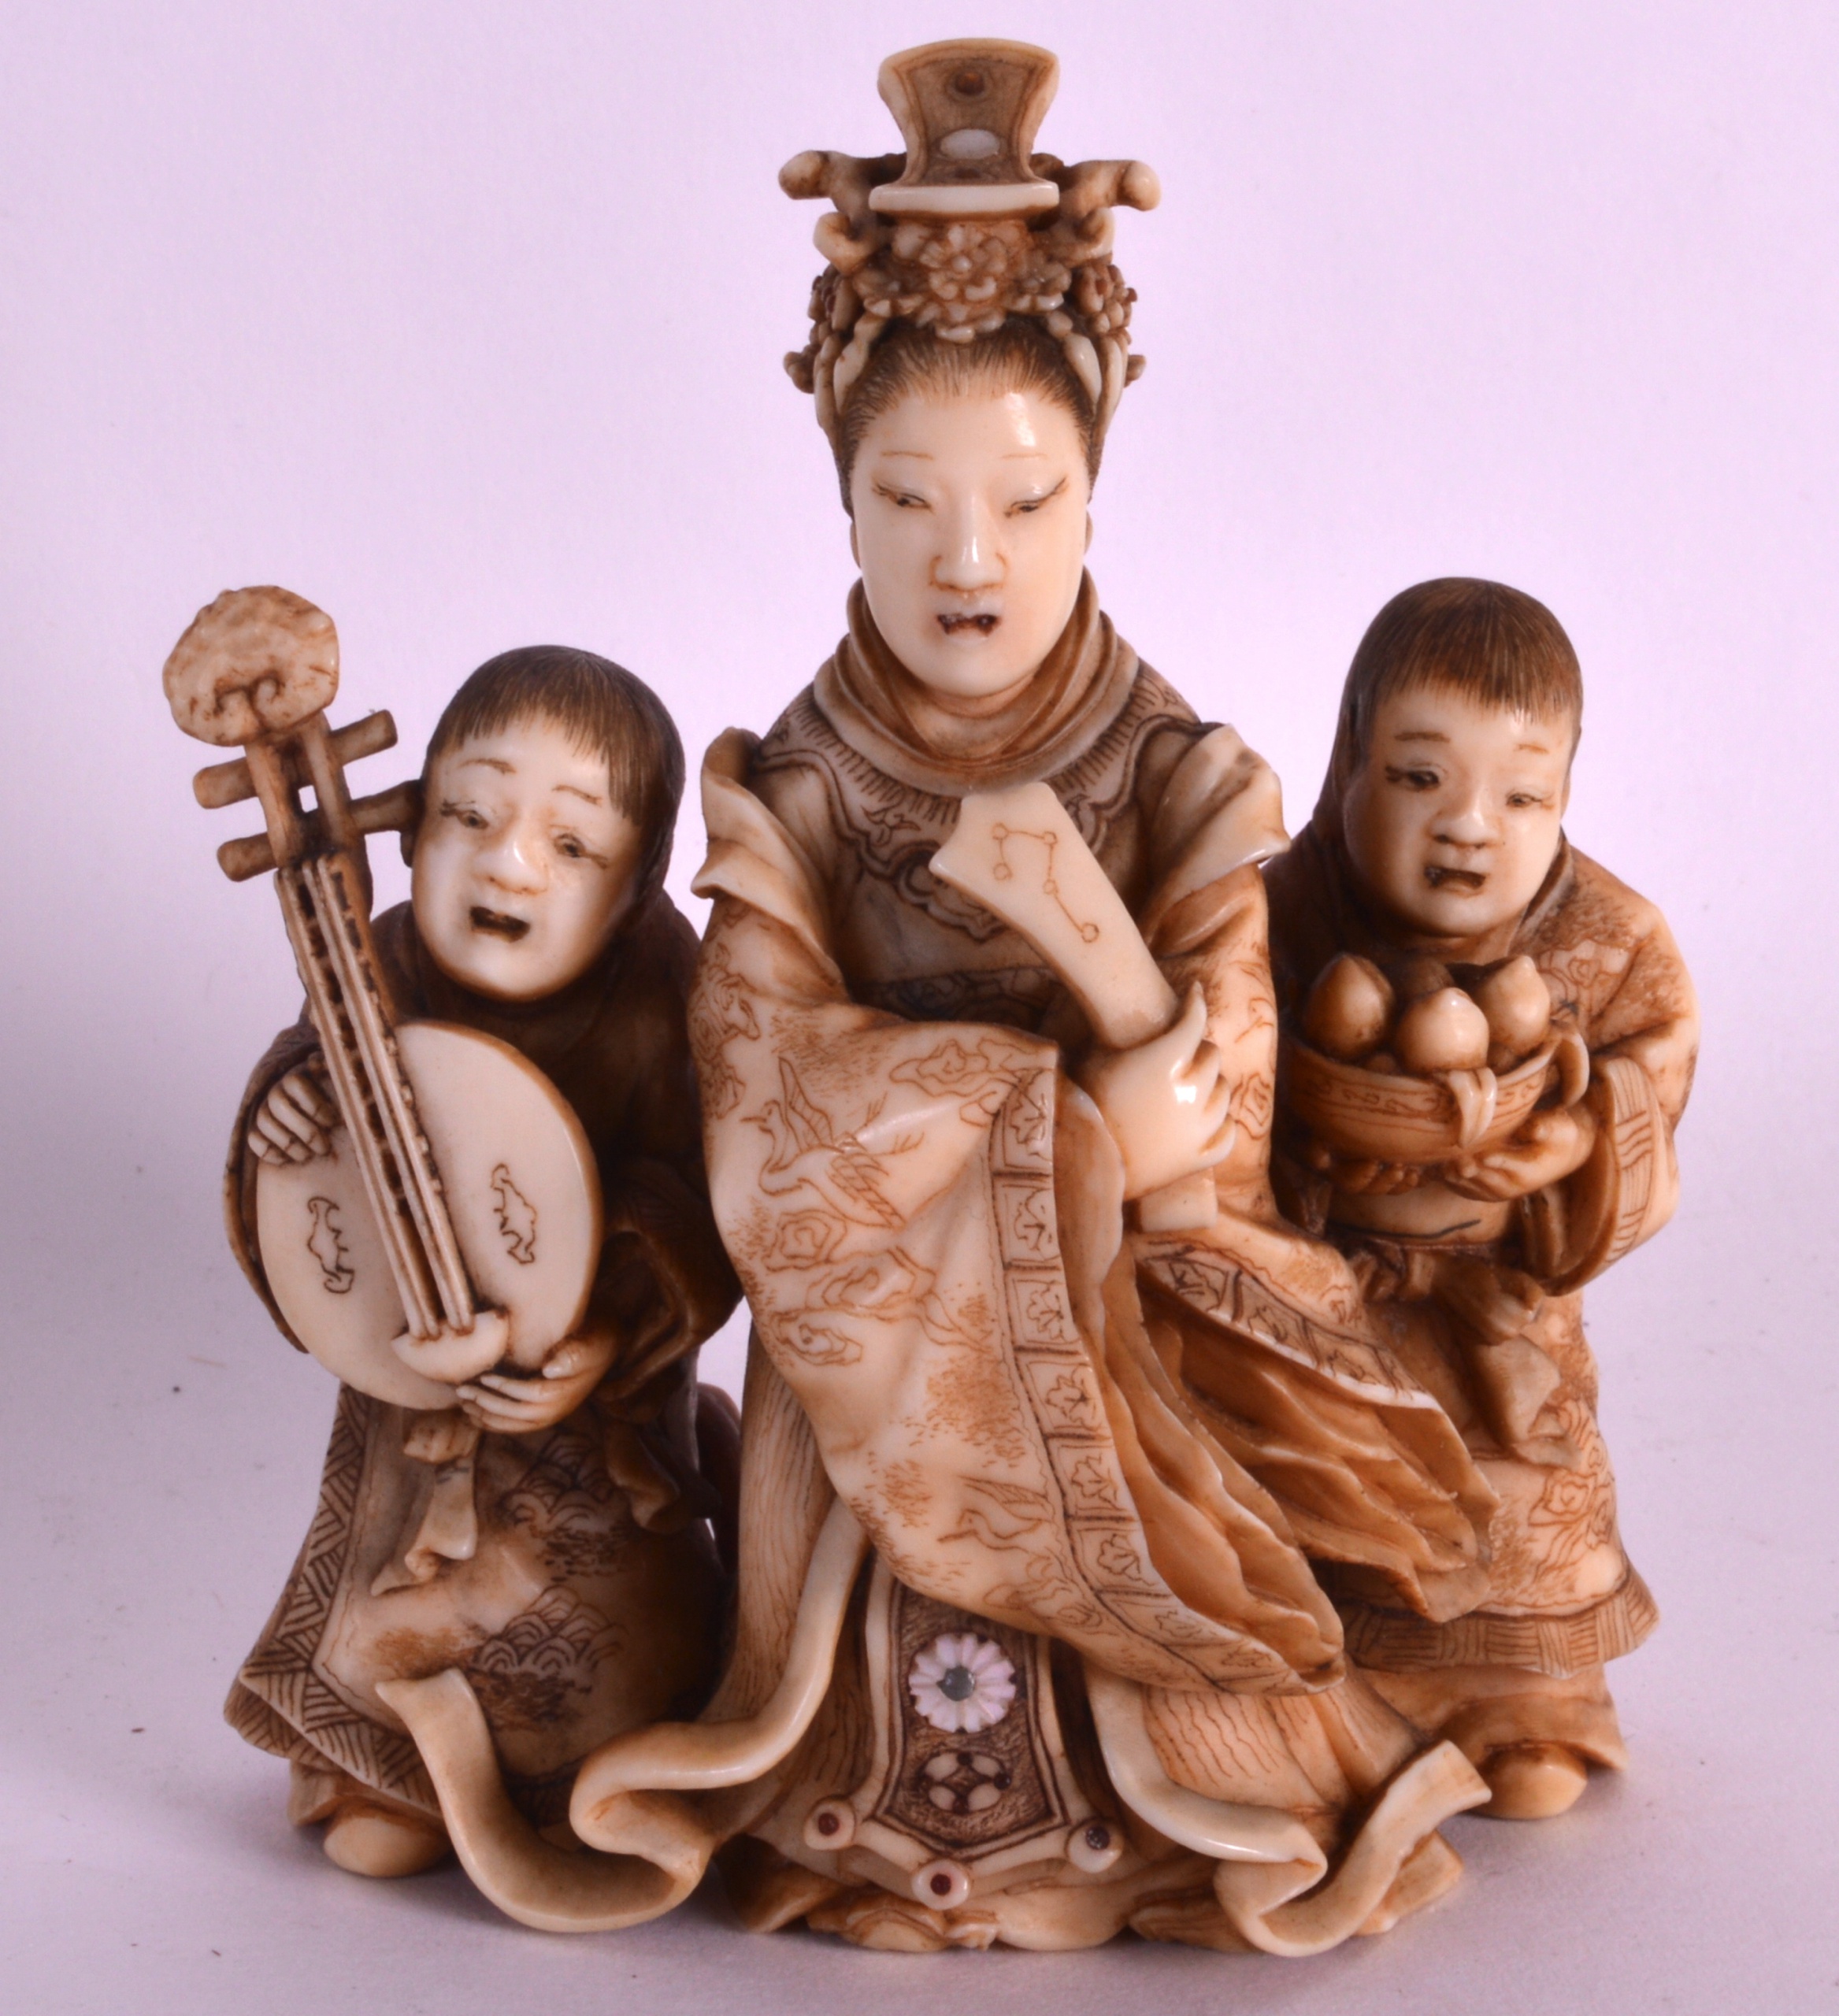 A LOVELY 19TH CENTURY JAPANESE MEIJI PERIOD CARVED IVORY OKIMONO modelled as a mother and children